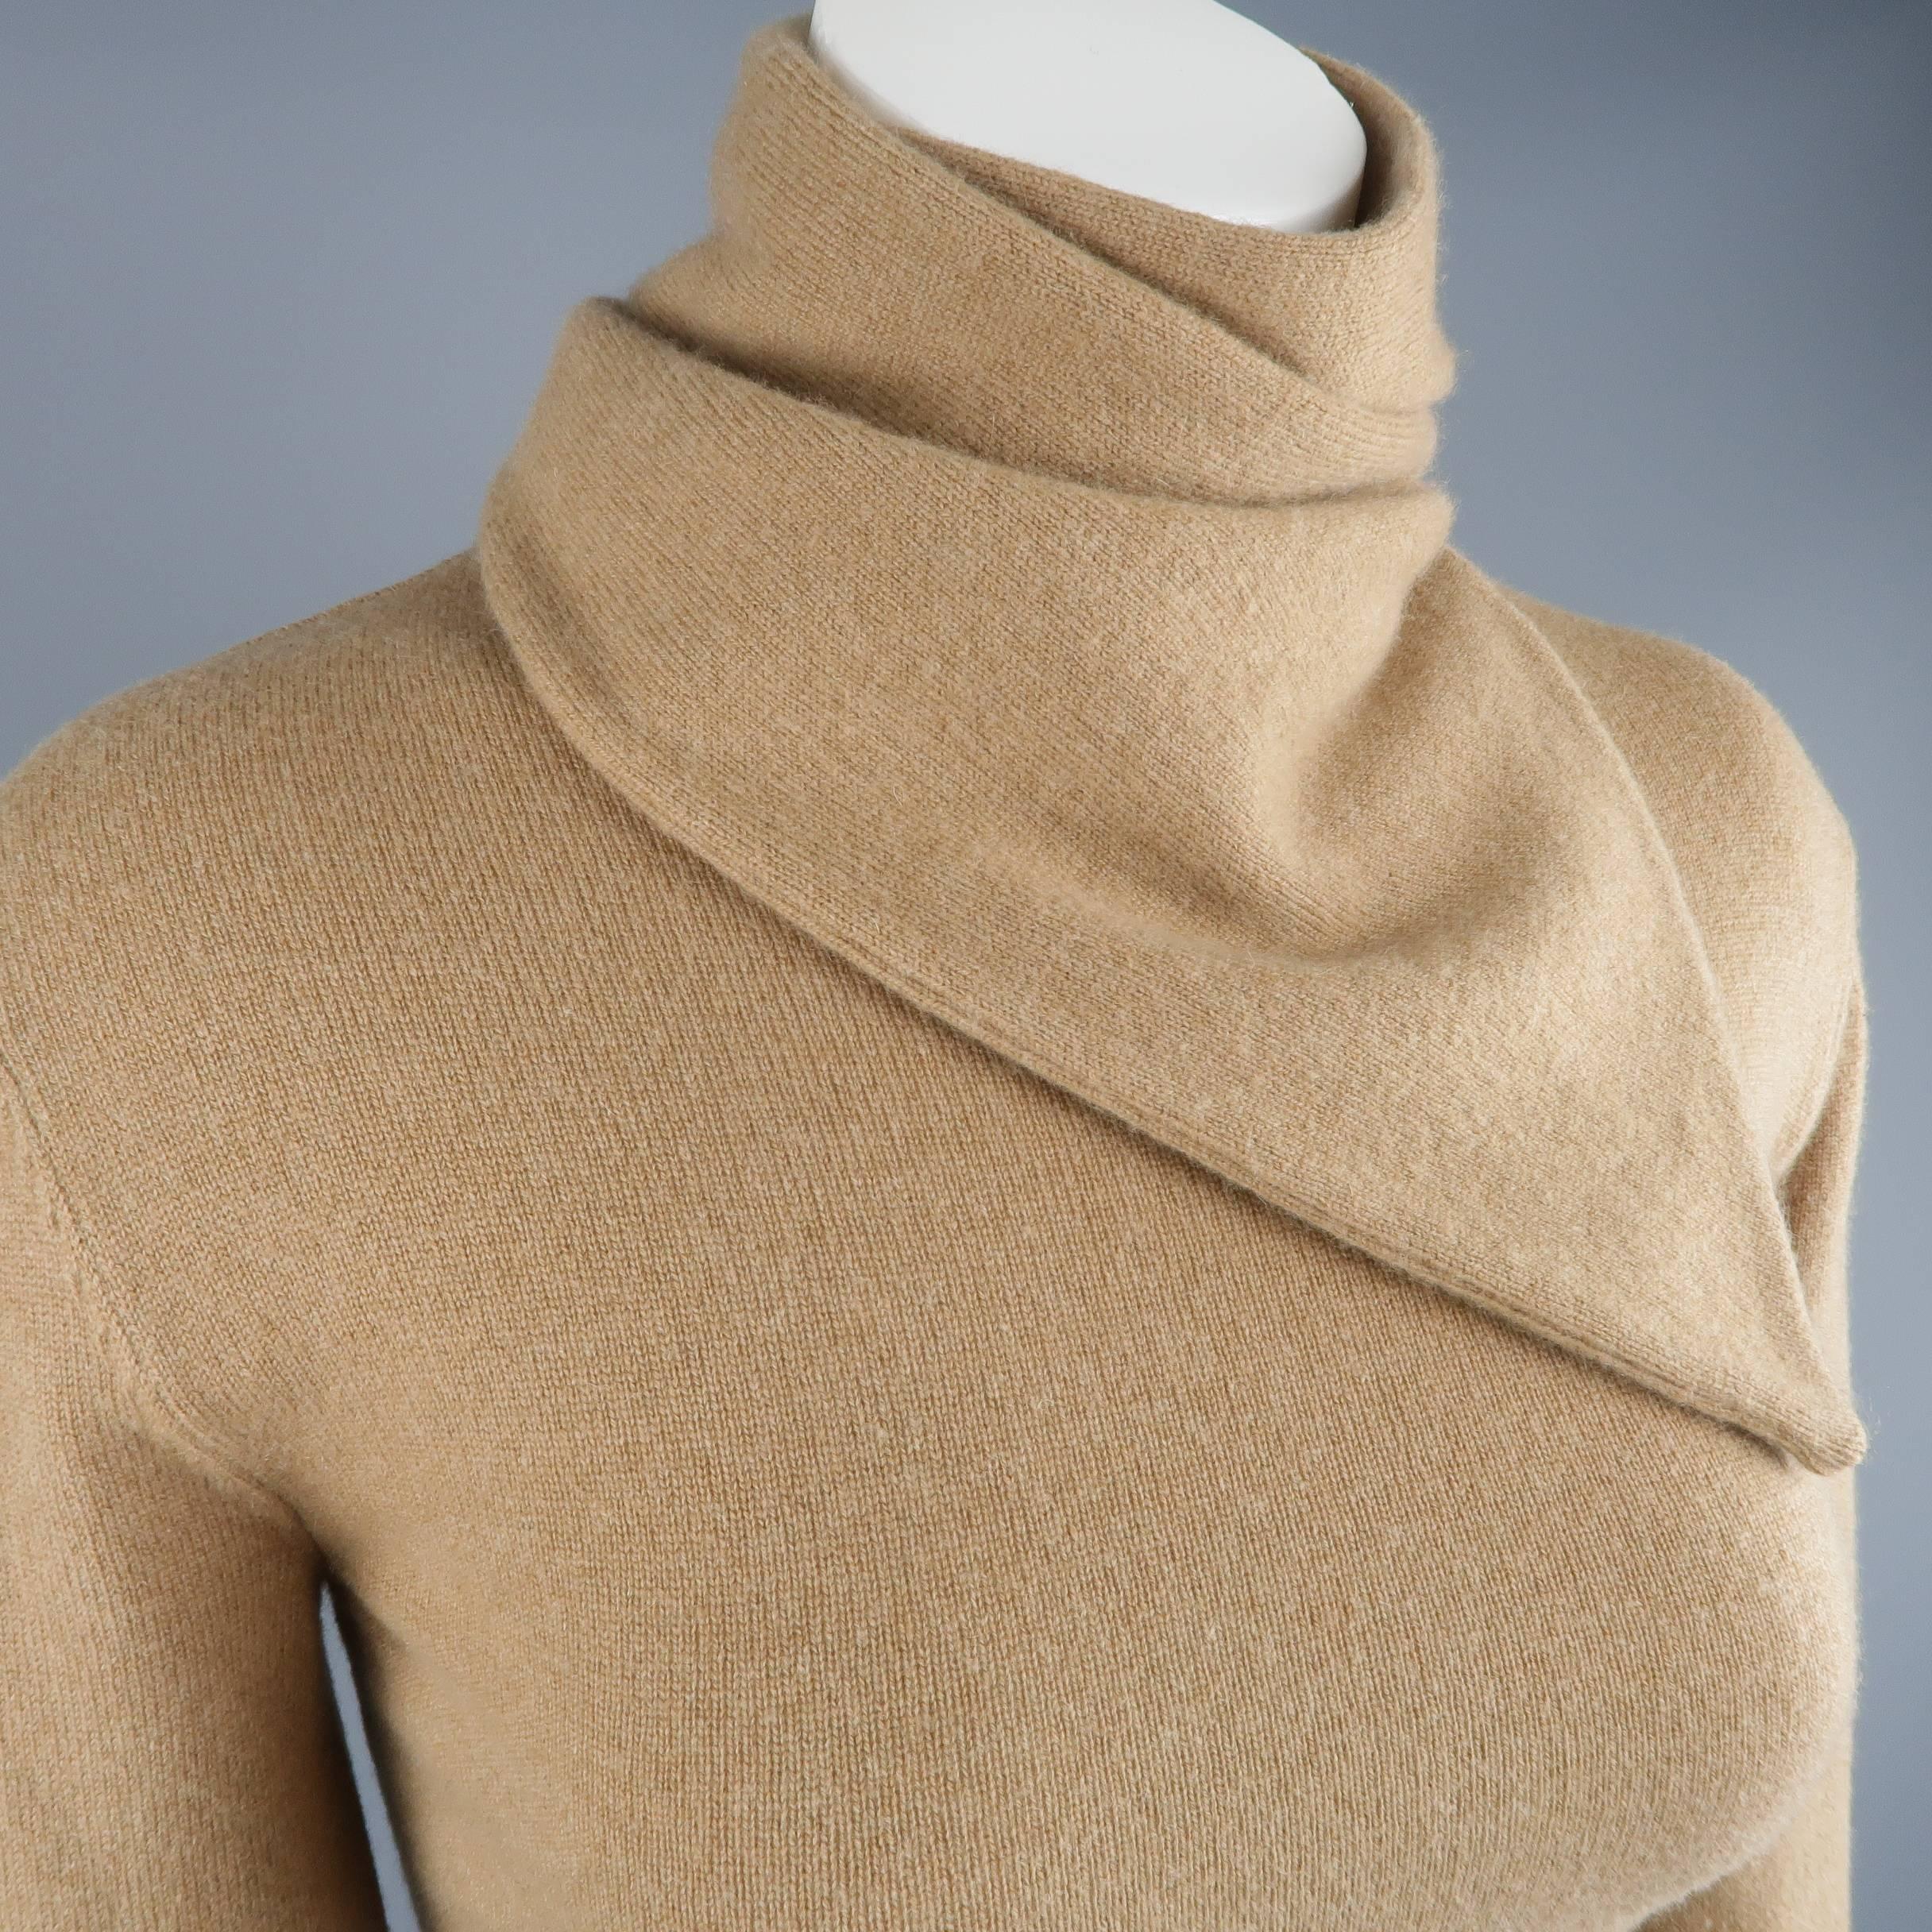 RALPH LAUREN COLLECTION pullover sweater comes in camel beige cashmere knit and features an asymmetrical wrap scarf neckline. Made in Italy.
 
Excellent Pre-Owned Condition.
Marked: M
 
Measurements:
 
Shoulder: 16.5 in.
Bust: 34 in.
Sleeve: 24